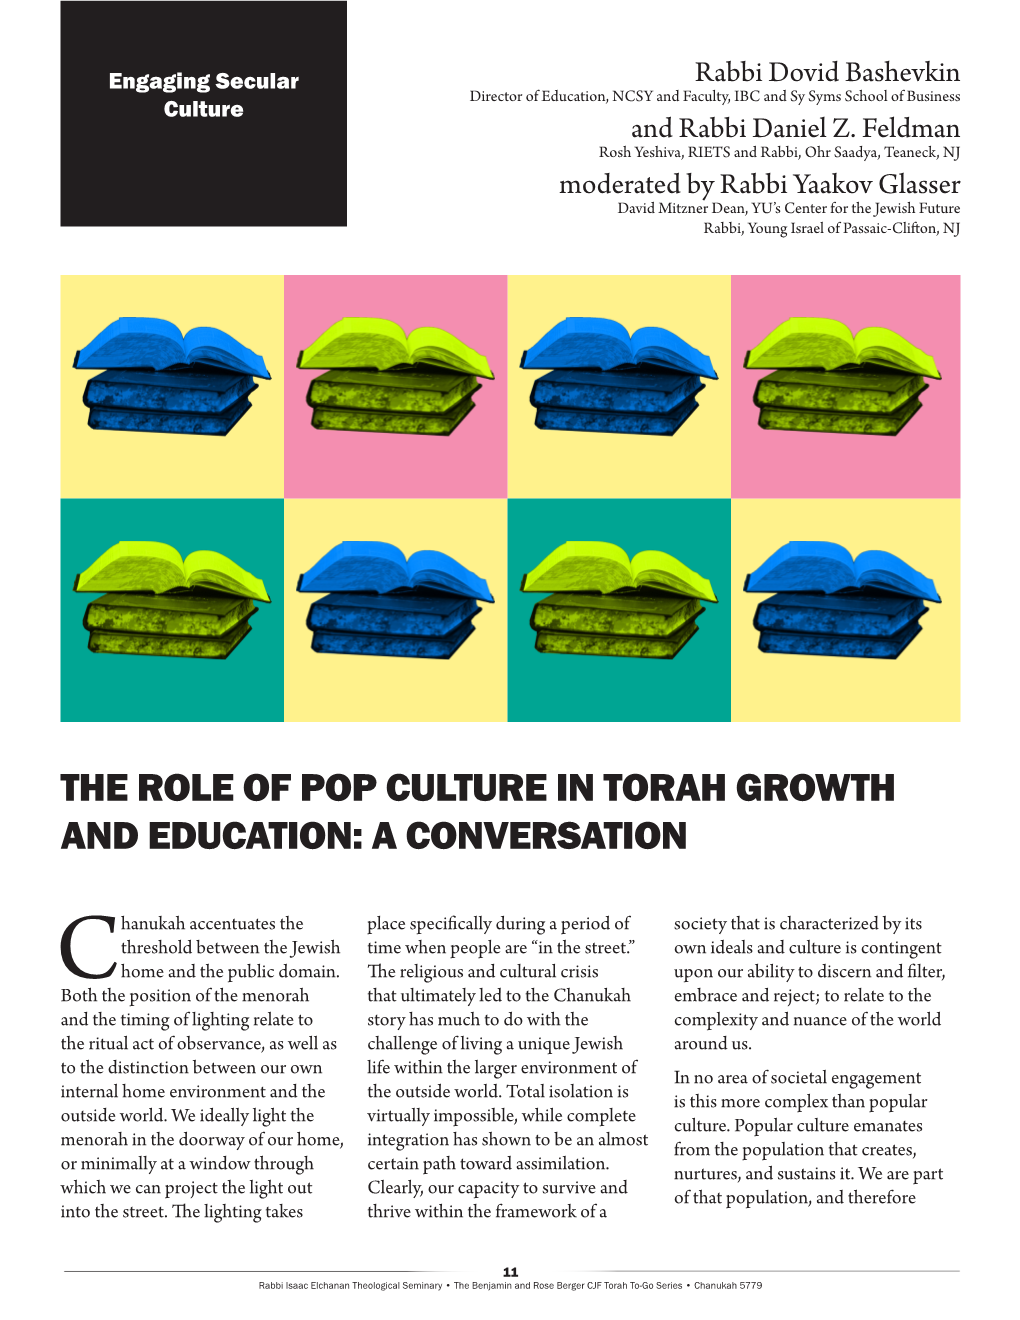 The Role of Pop Culture in Torah Growth and Education: a Conversation